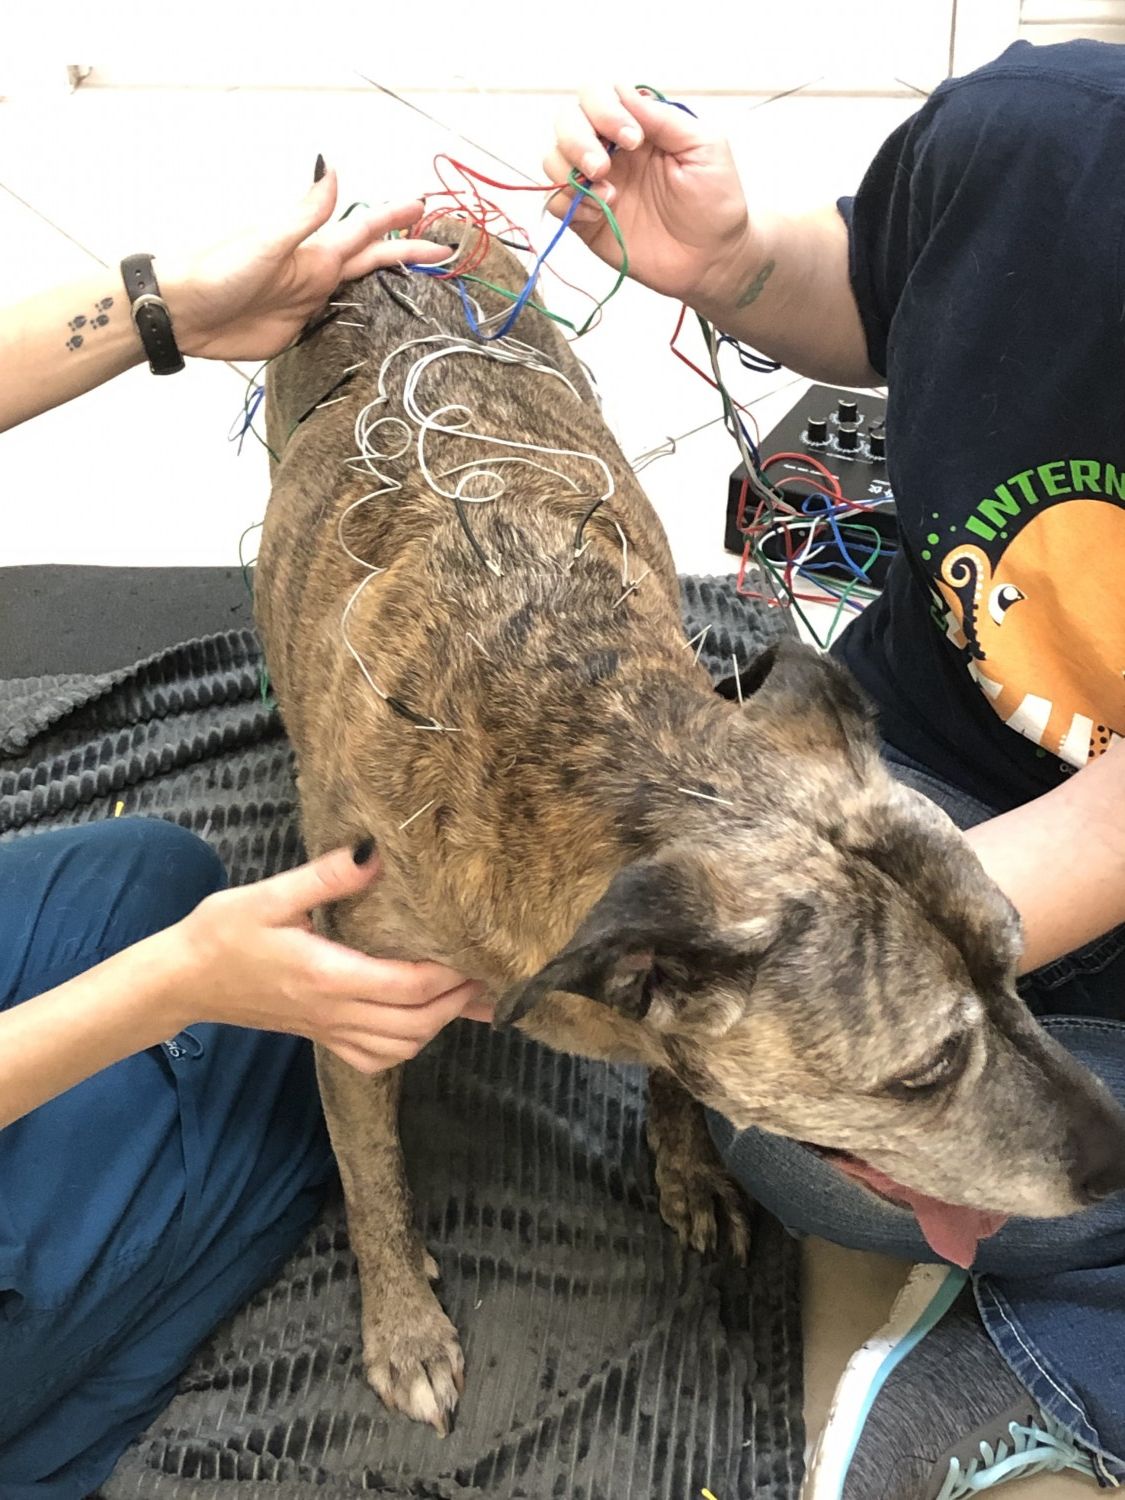 Dog getting Acupuncture Treatment